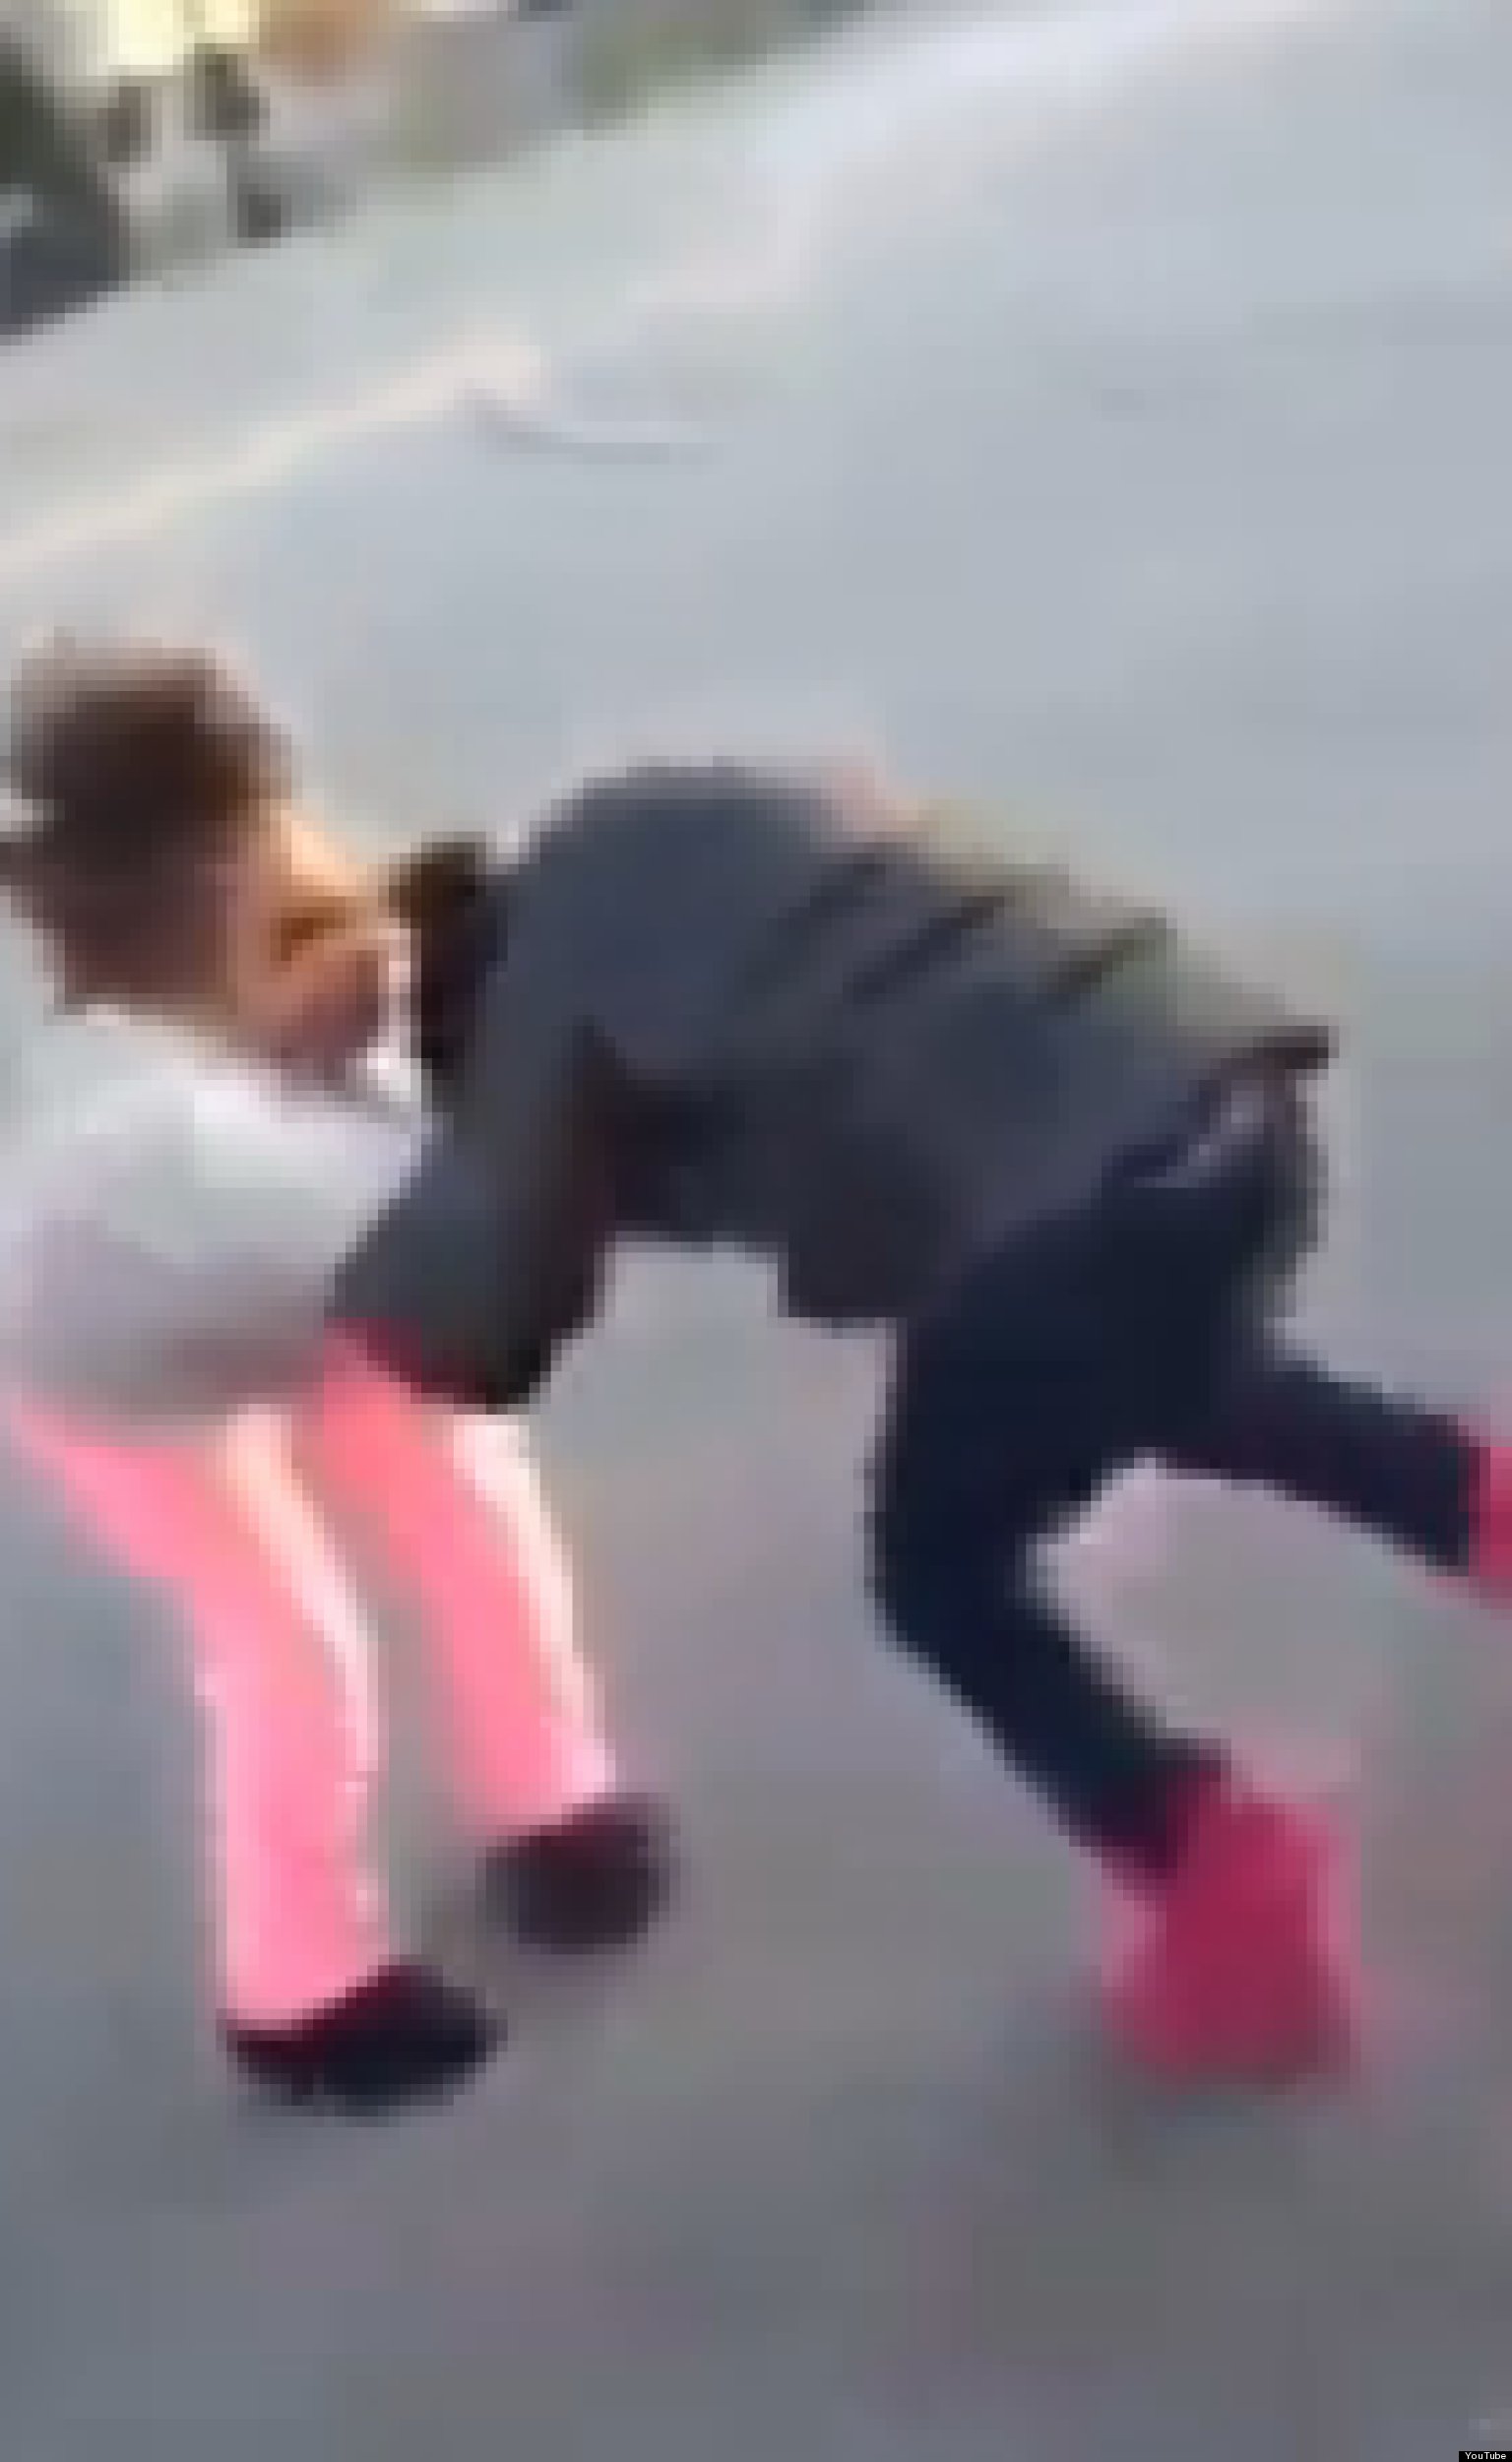 Girls In New York City Forced To Fight In YouTube Video | HuffPost